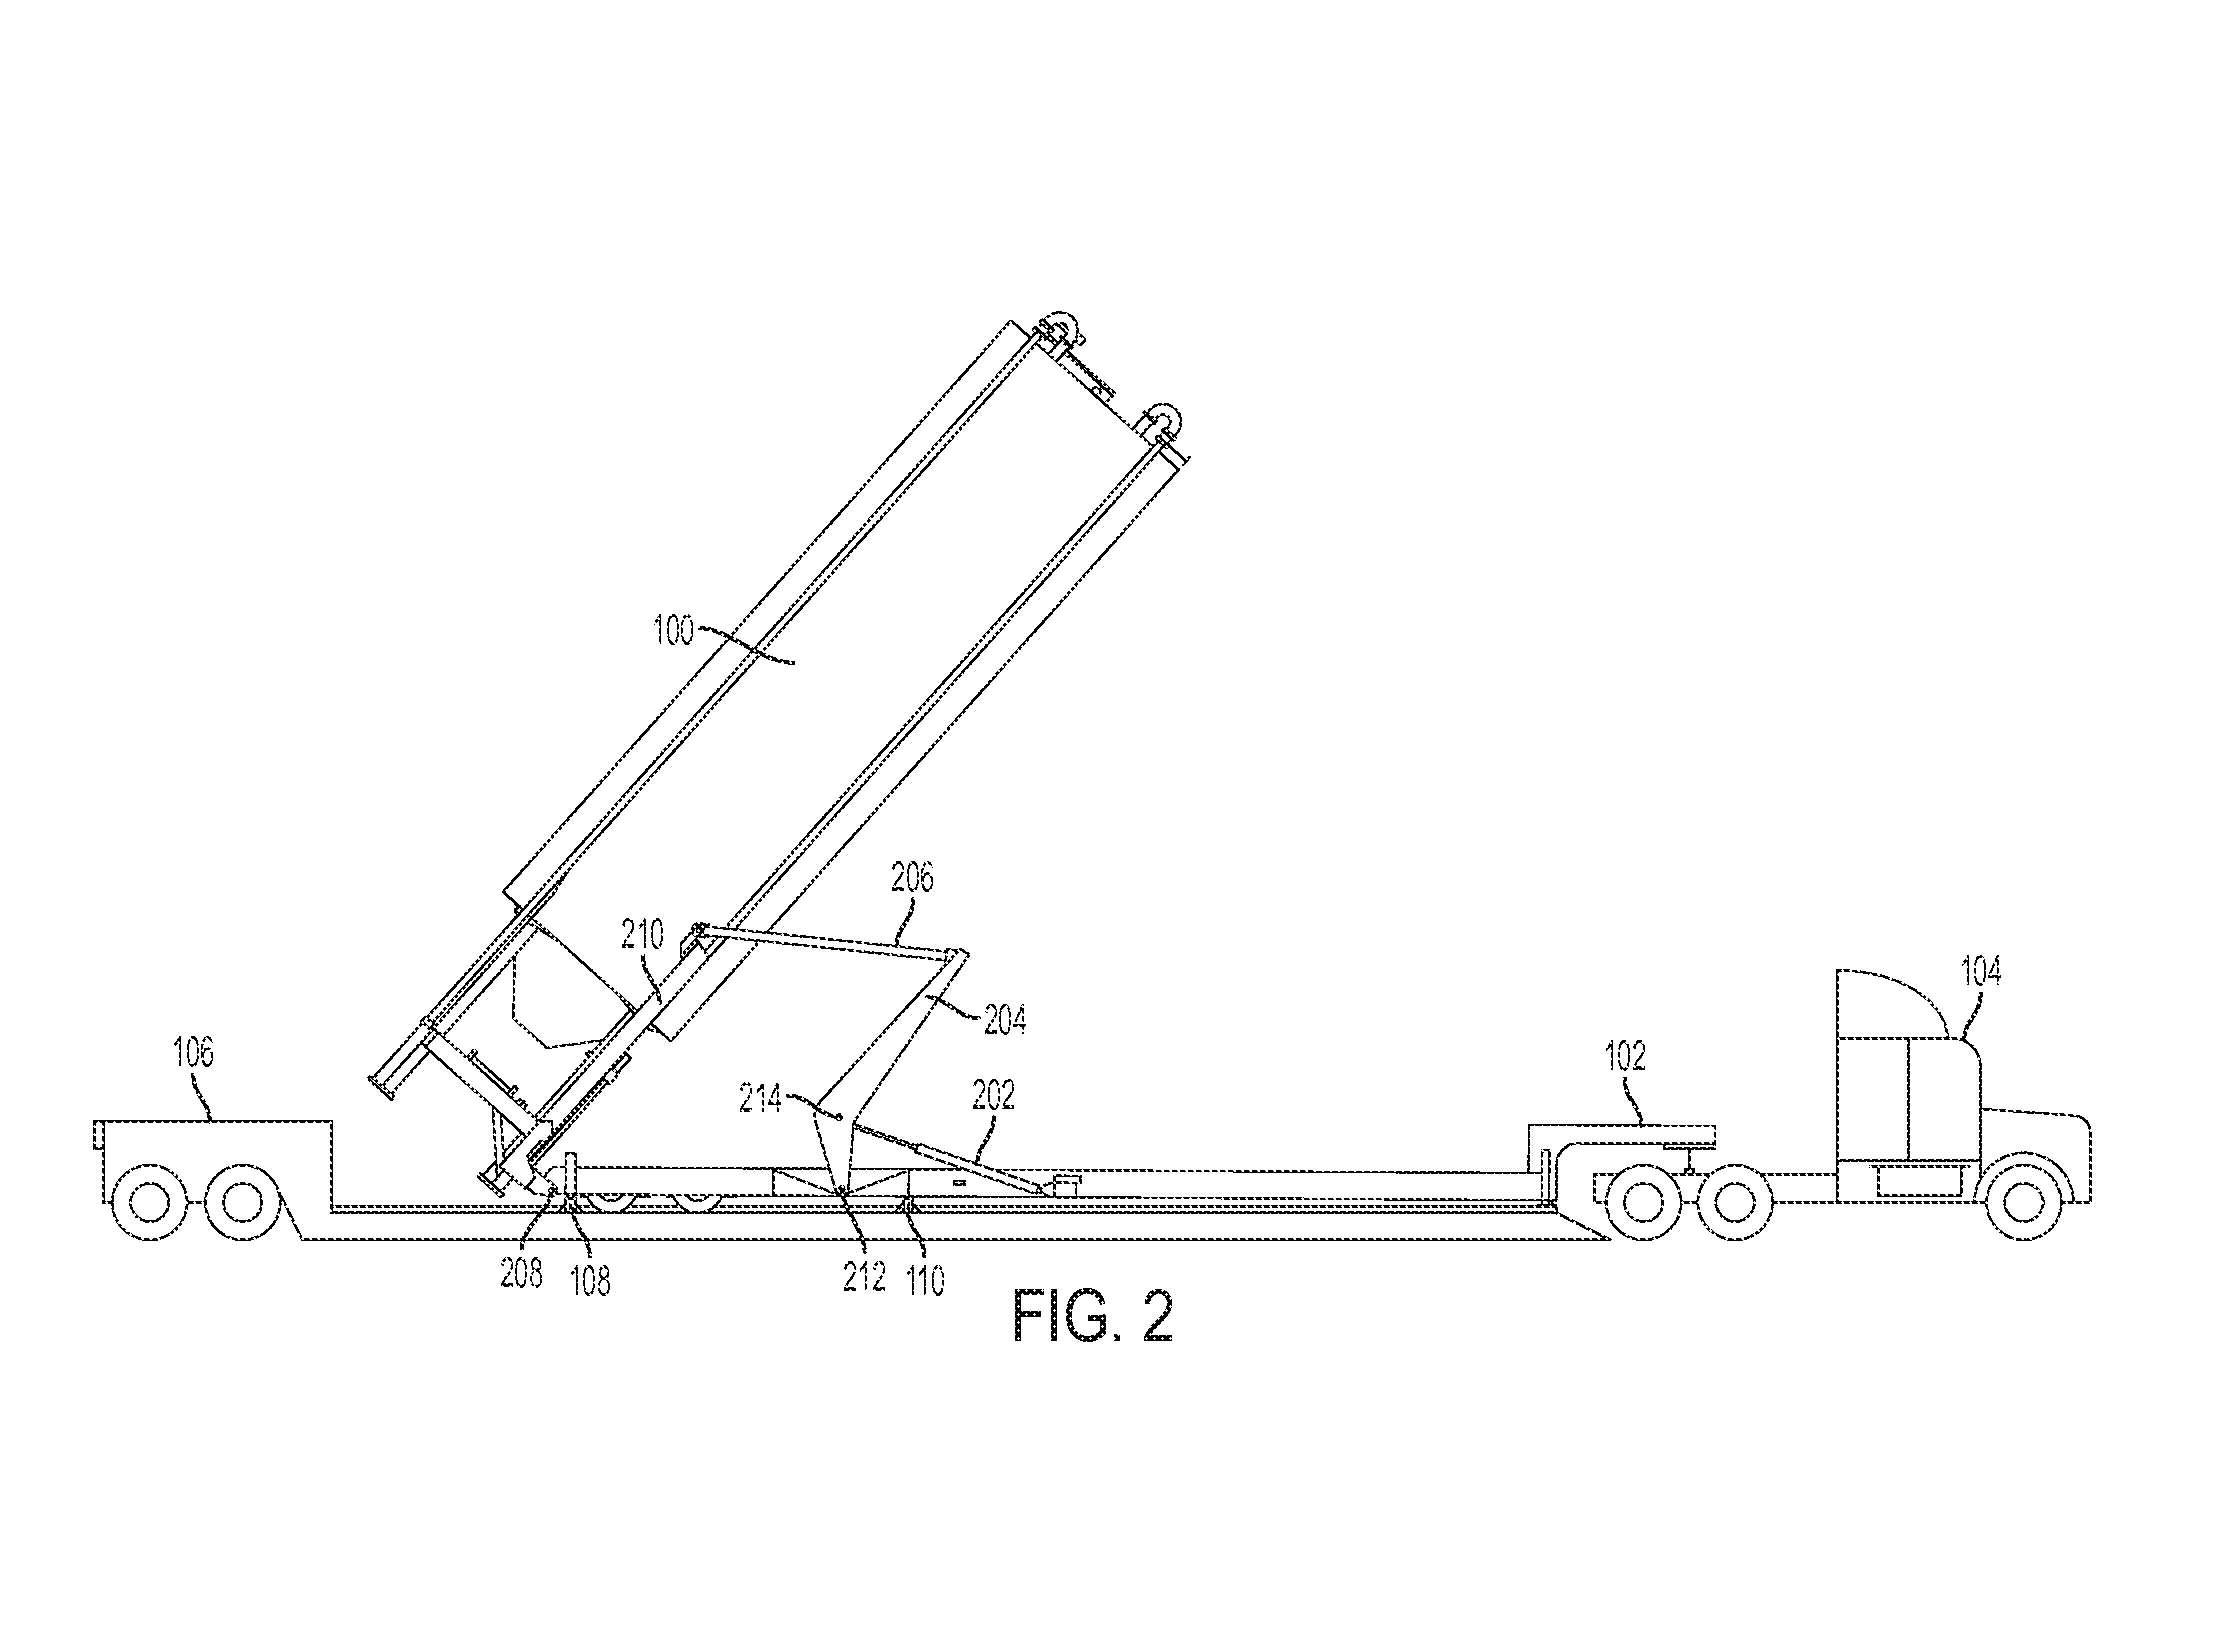 Fracture sand silo system and methods of deployment and retraction of same